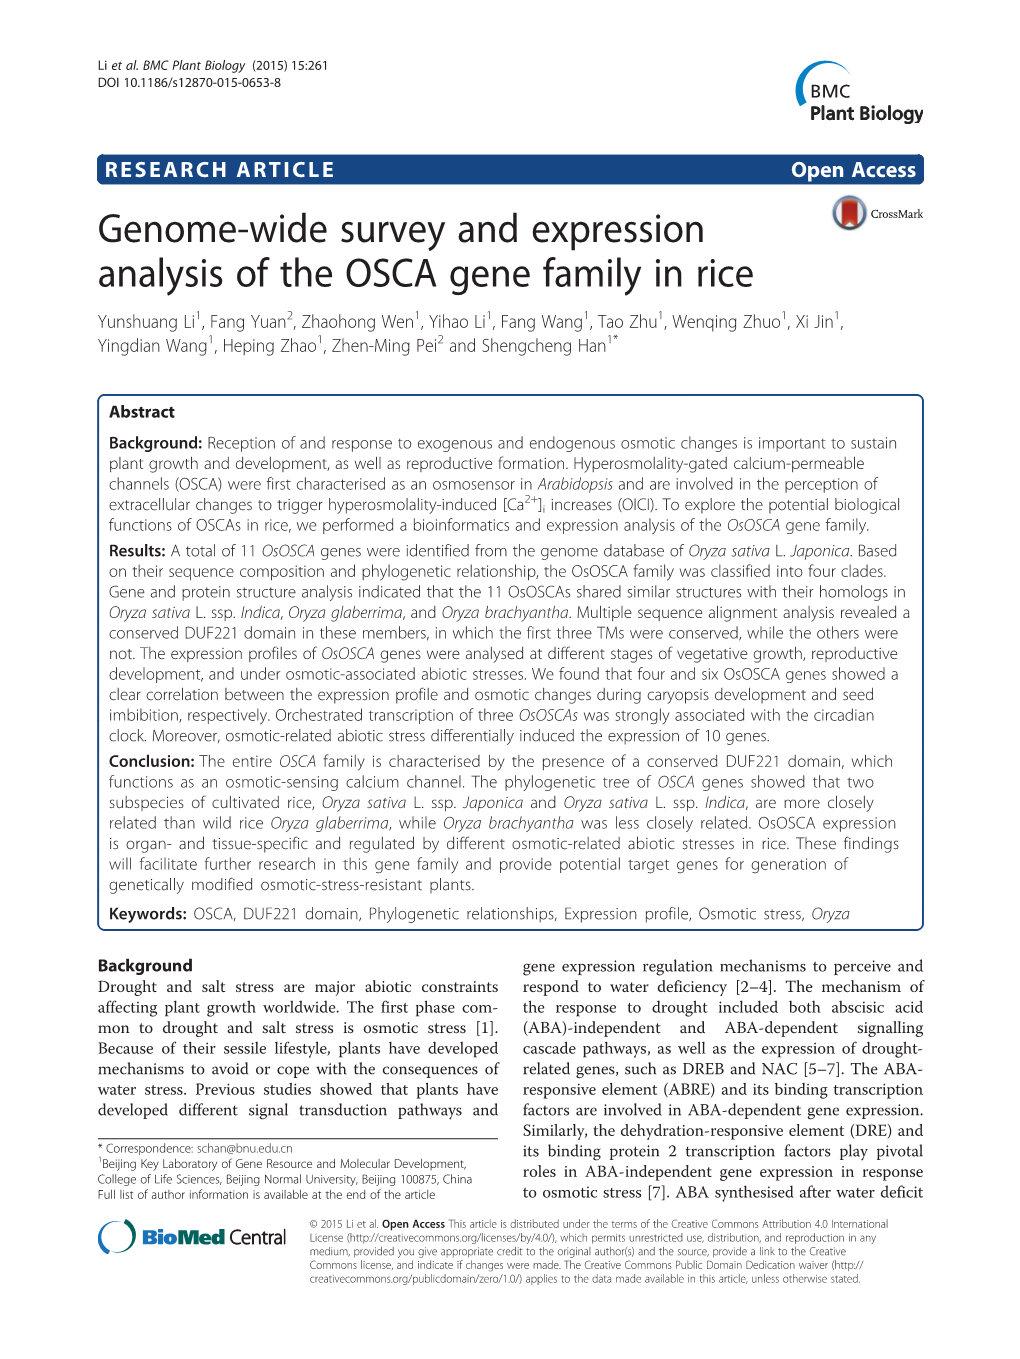 Genome-Wide Survey and Expression Analysis of the OSCA Gene Family In